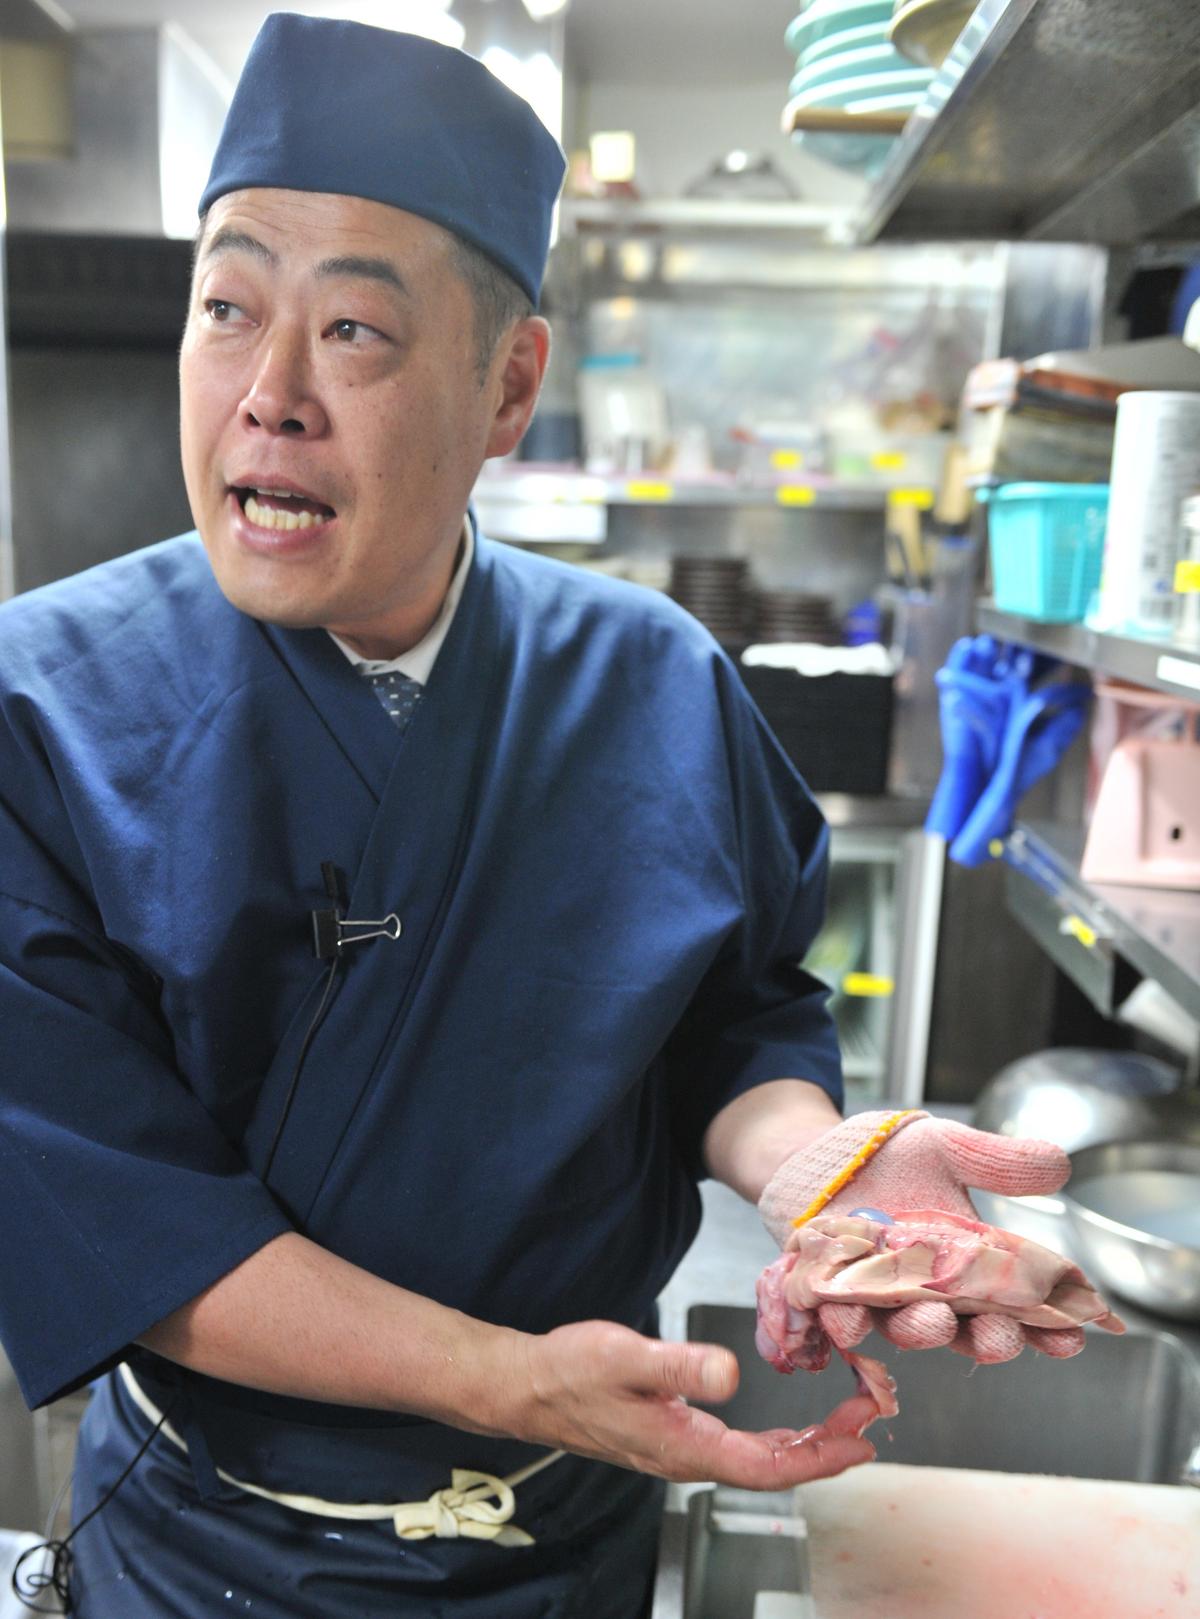 A Japanese chef shows the liver of a pufferfish, at his restaurant in Tokyo, June 2012. (Yoshikazu Tsuno/AFP/GettyImages)